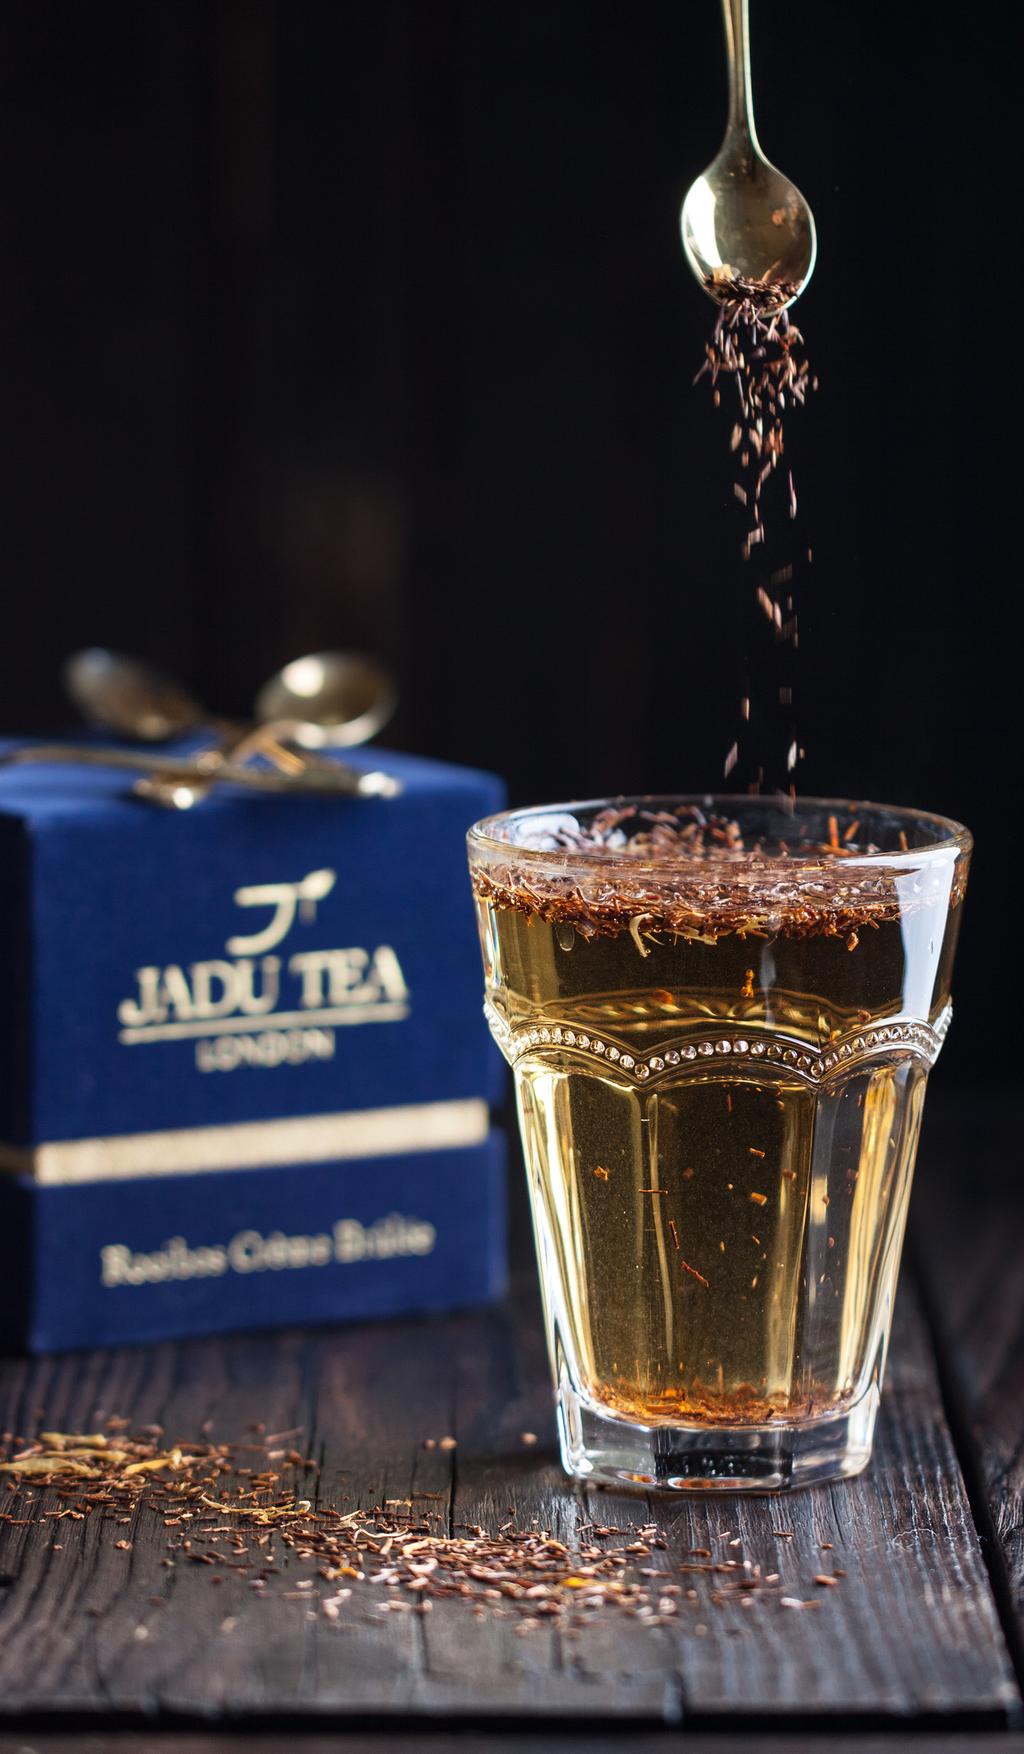 English Breakfast A smooth and satisfying blend of premium black teas: rich, malty tippy golden Assam combined with bright and refreshing Sri Lankan Uva Orange Pekoe.